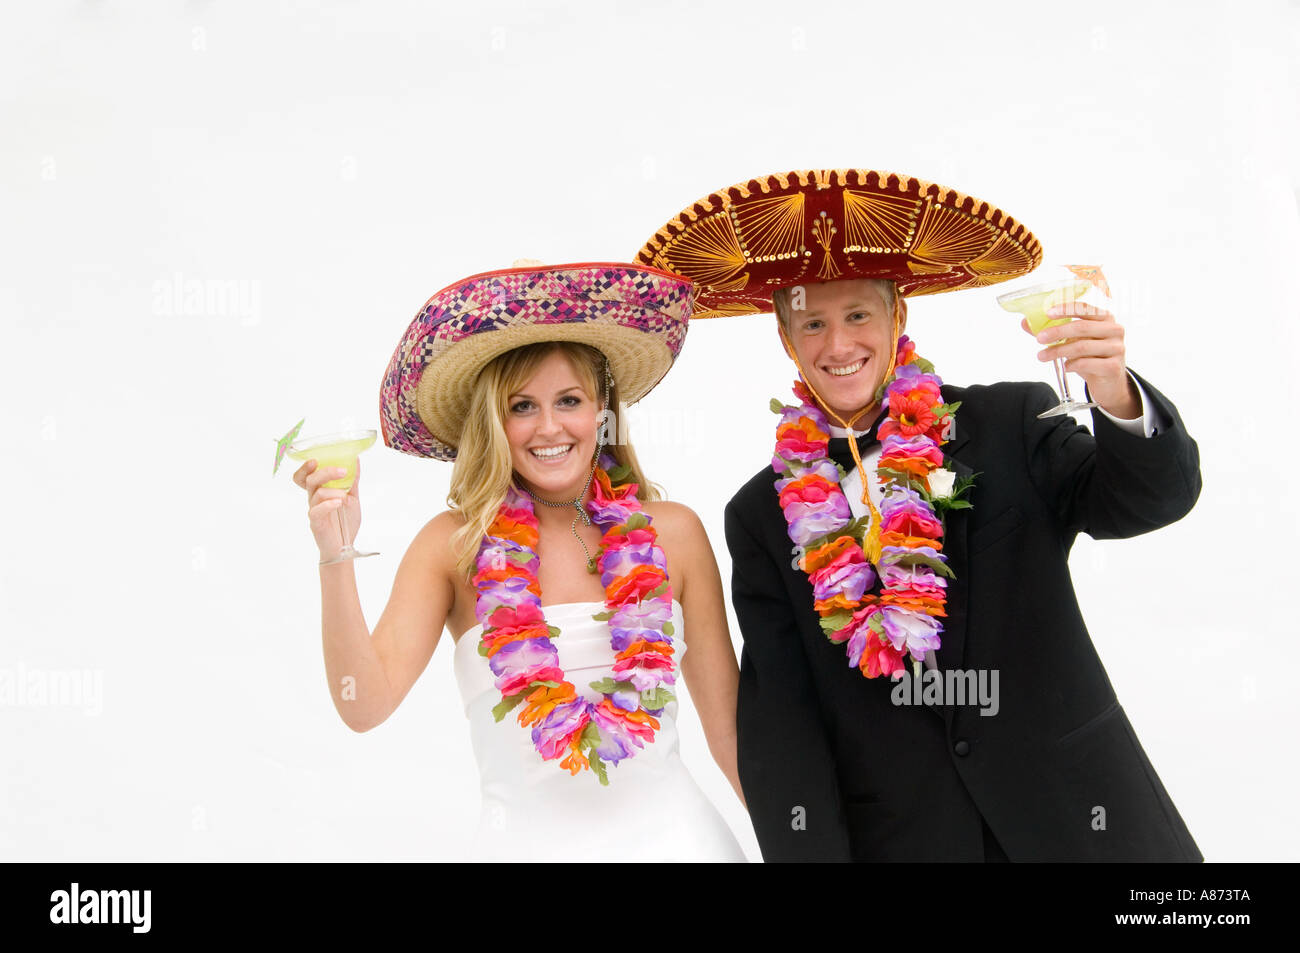 Bride and groom wearing sombreros and leis Stock Photo - Alamy